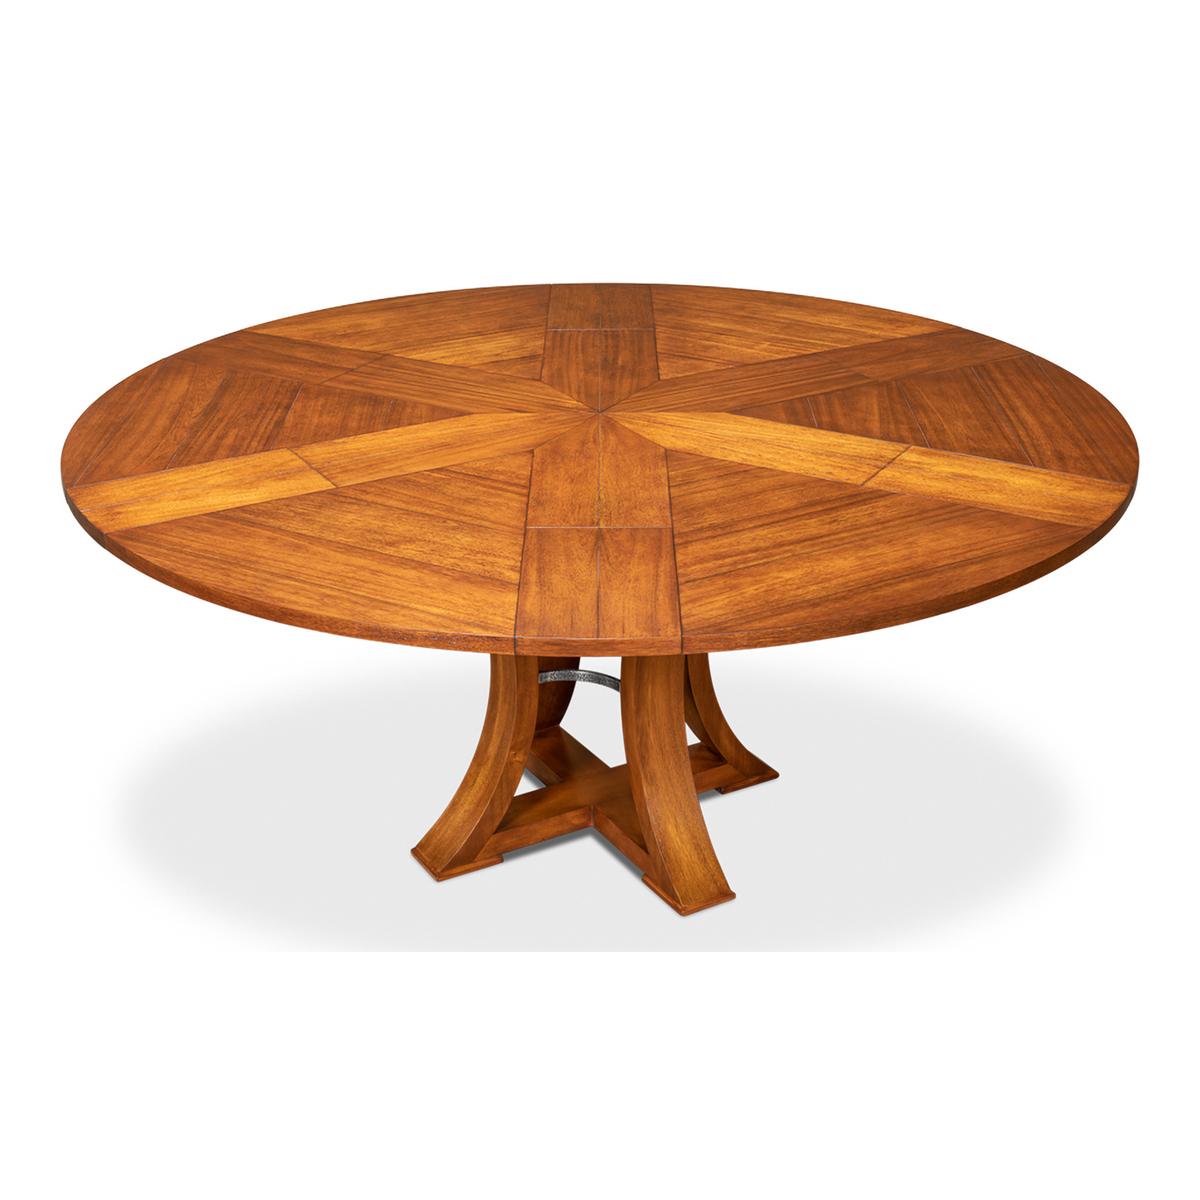 Modern Transitional Dining Table, 70, Tobacco Finish In New Condition For Sale In Westwood, NJ